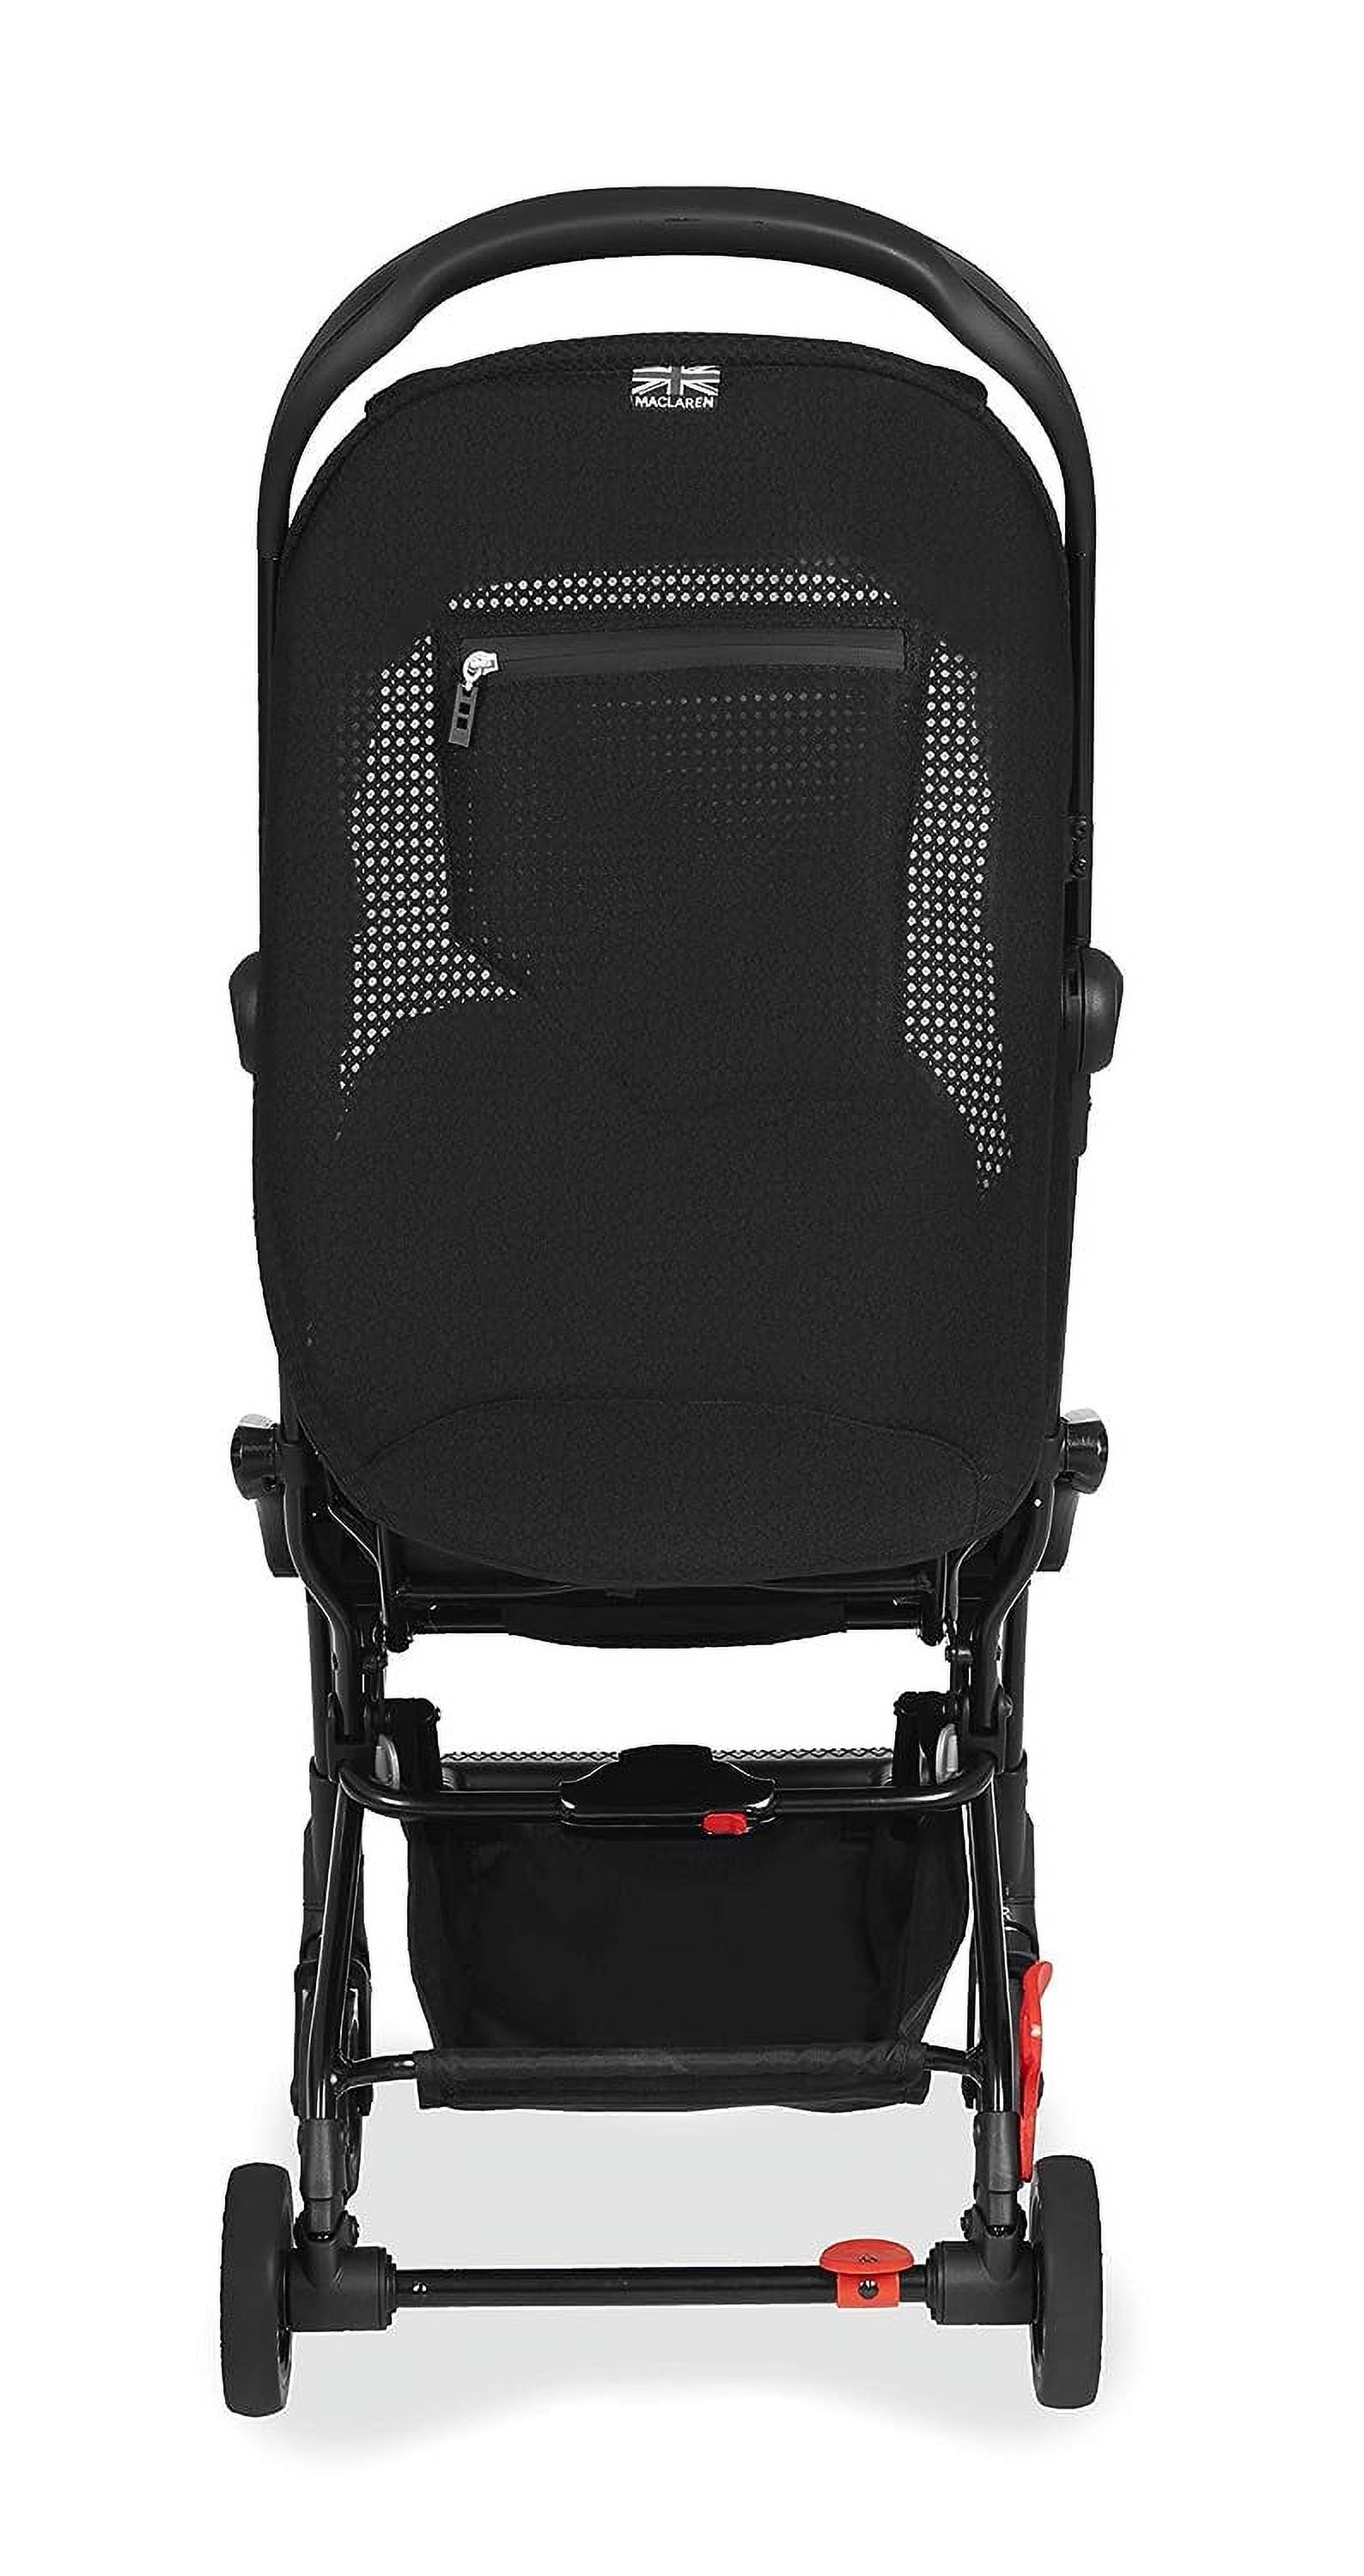 Maclaren Atom Style Set Travel System- Super Lightweight, Ultra-Compact Stroller, Fits On Airplane's Overhead Storage. Car Seat Compatible. Loaded with Accessories. Multi-Position Reclining Seat - image 3 of 6